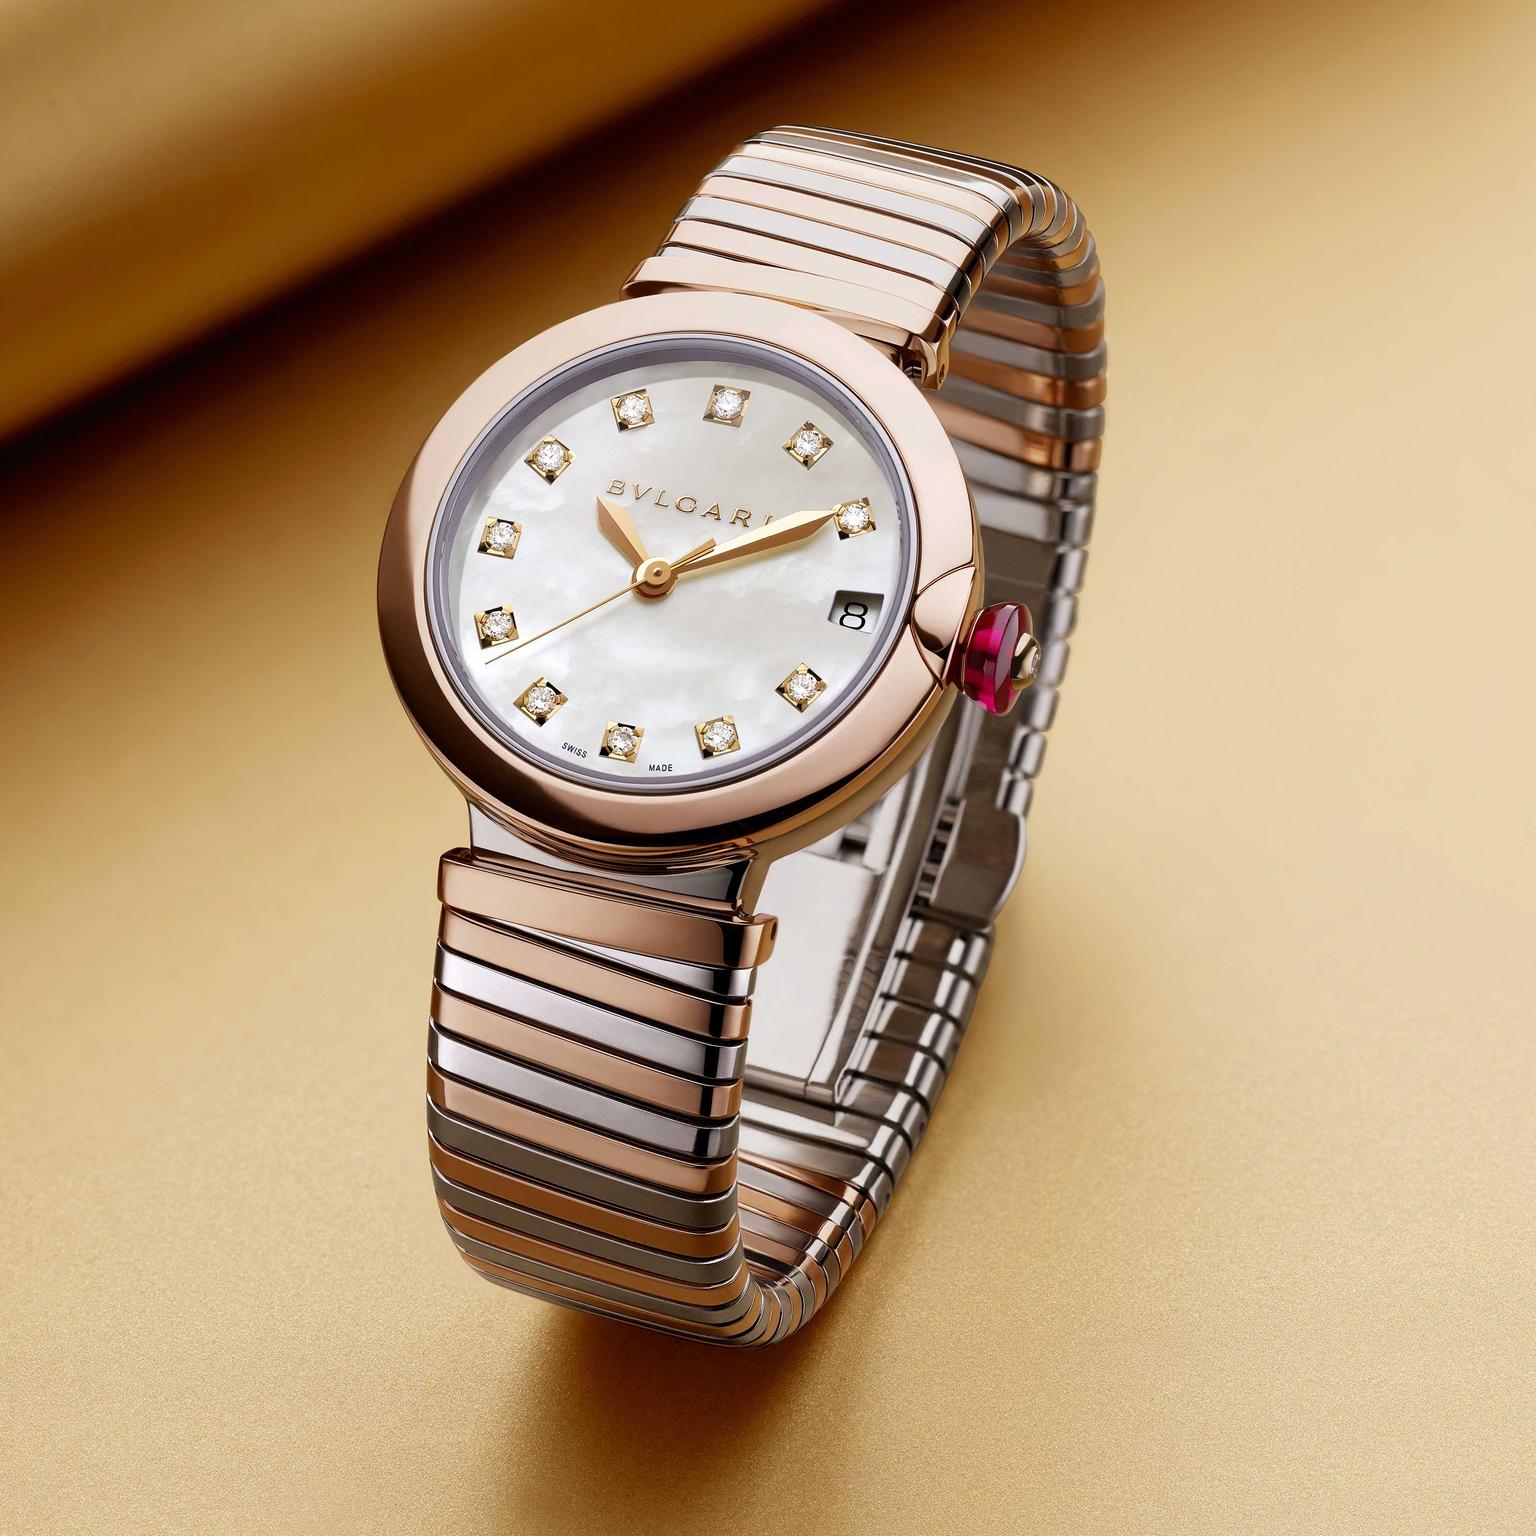 Bulgari Lvcea Tubogas 33mm stainless steel and rose gold women's watch 2018 Price €10,600